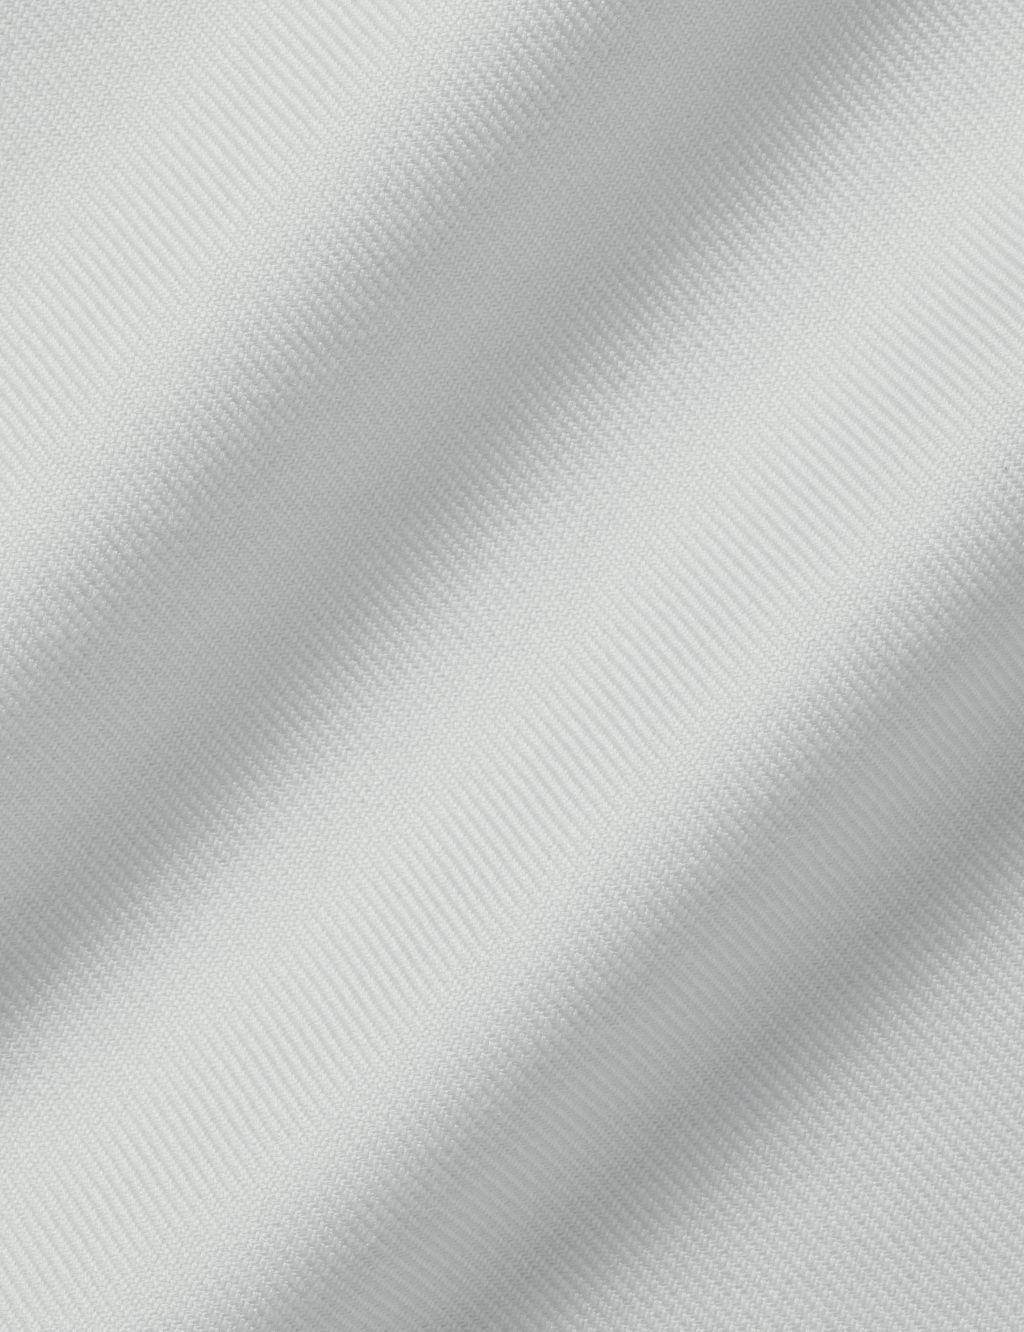 Stretch White Fabric by the yard